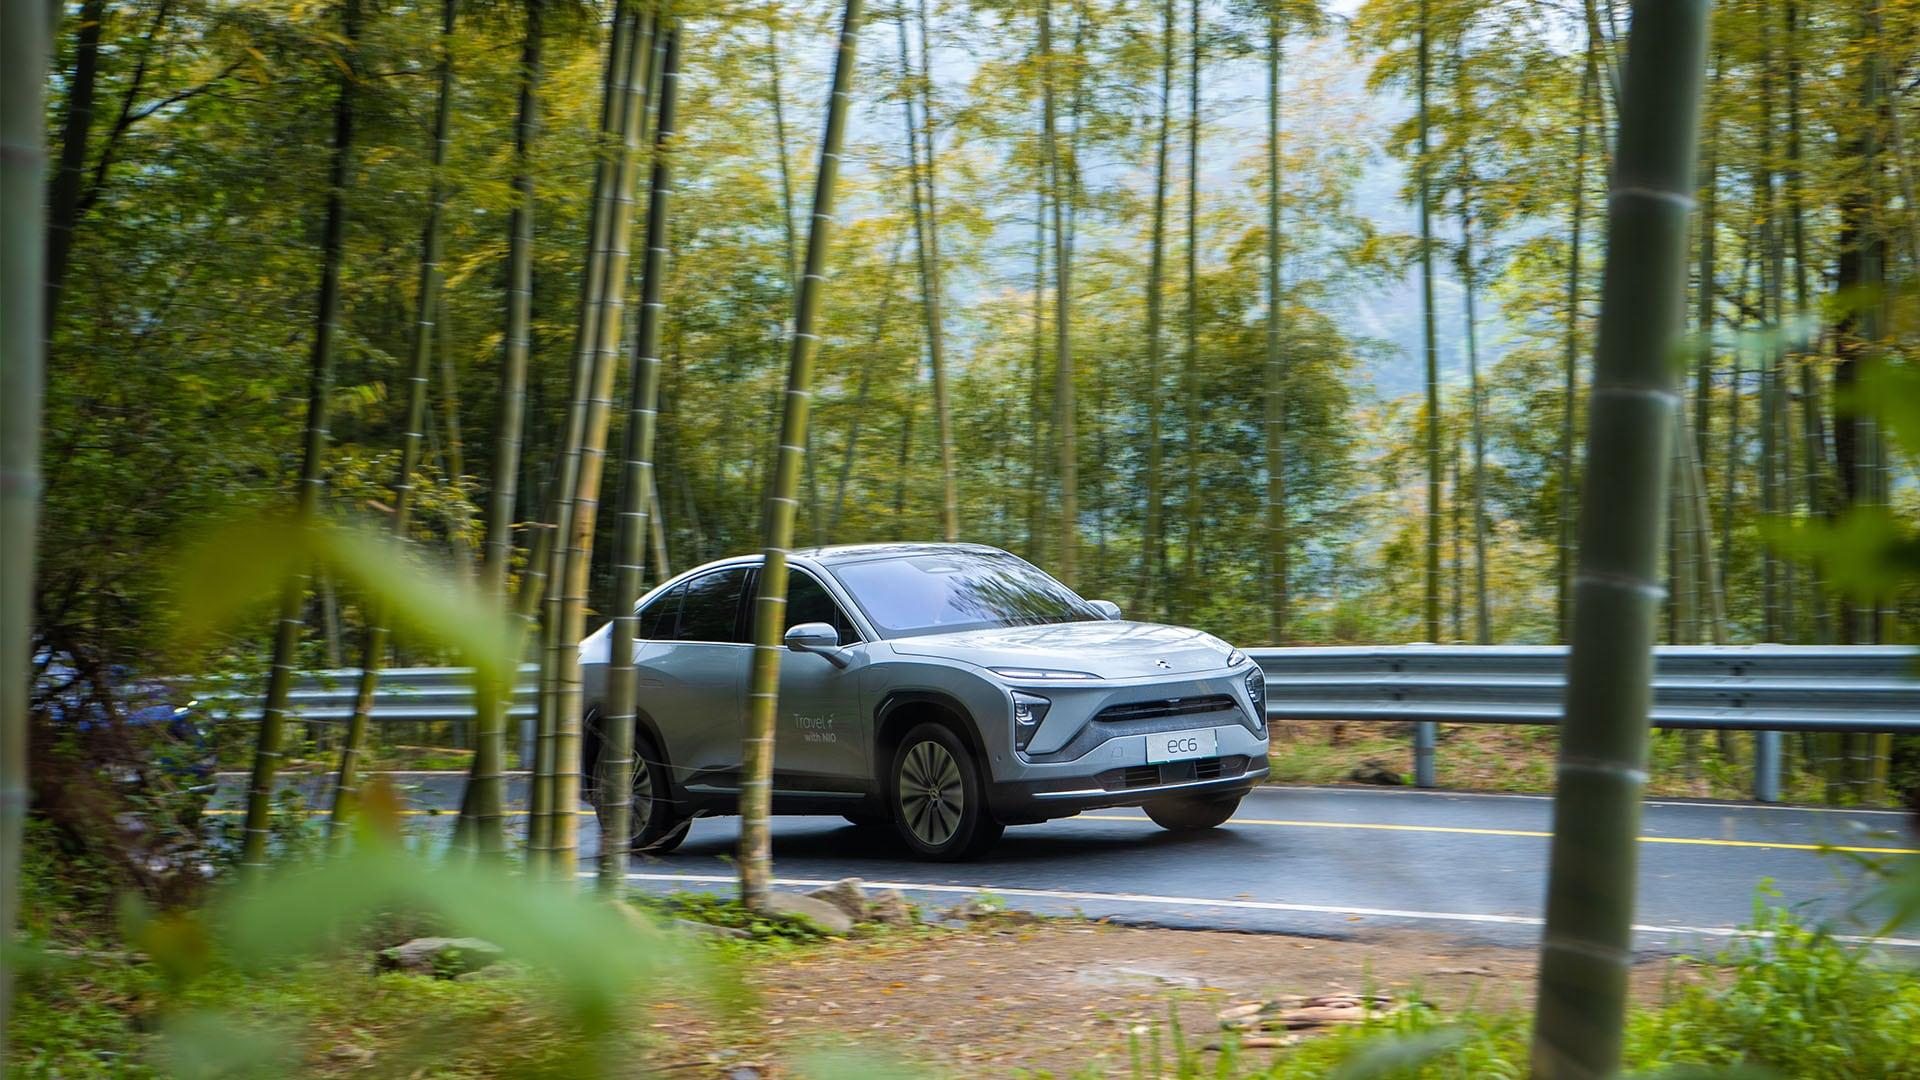 NIO Inc. Provides May 2021 Delivery Update